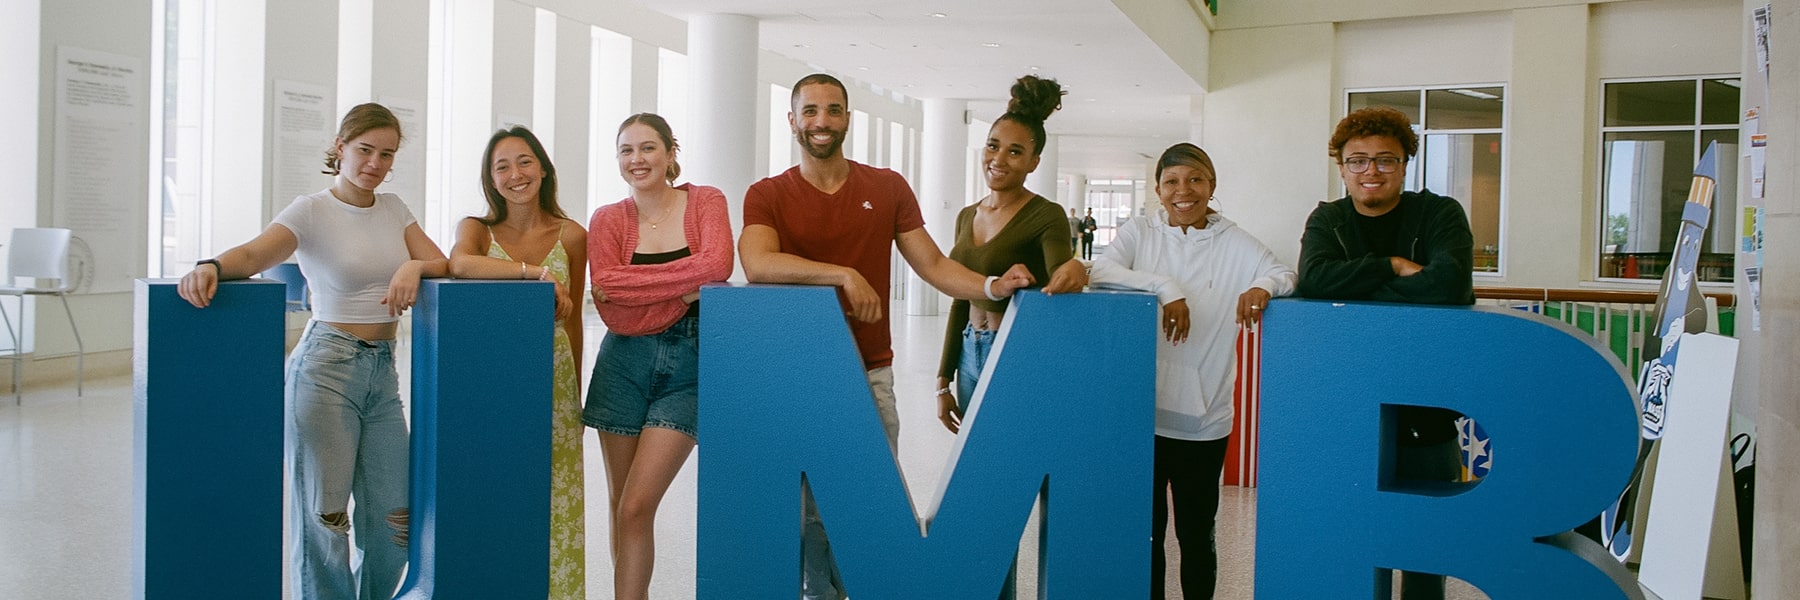 Students pose with sculptural UMB letters in Campus Center.